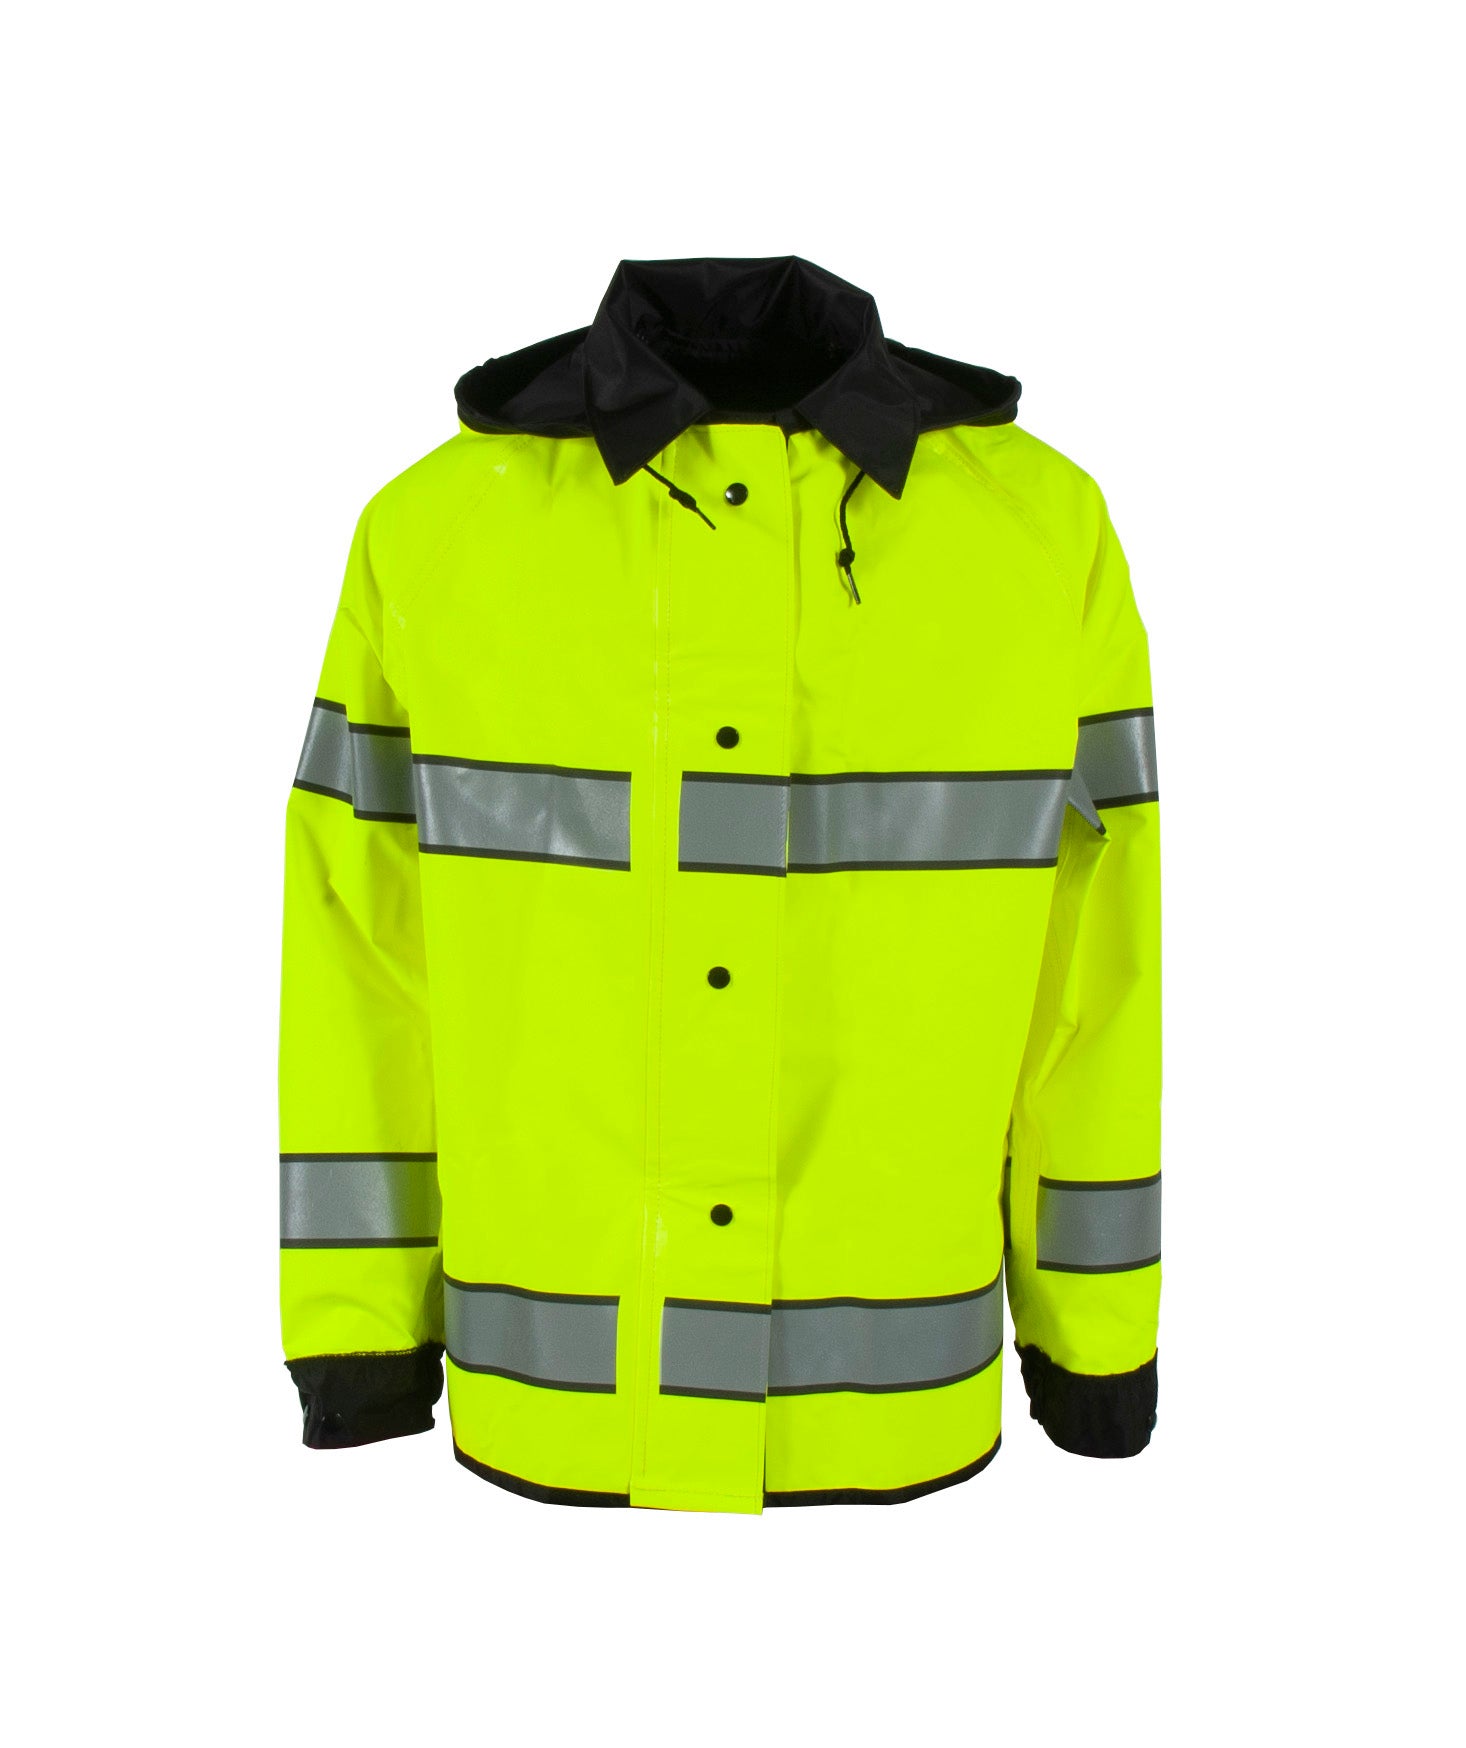 4703RJH3M Safe Officer Reversible Rain Jacket with Reflective Taping